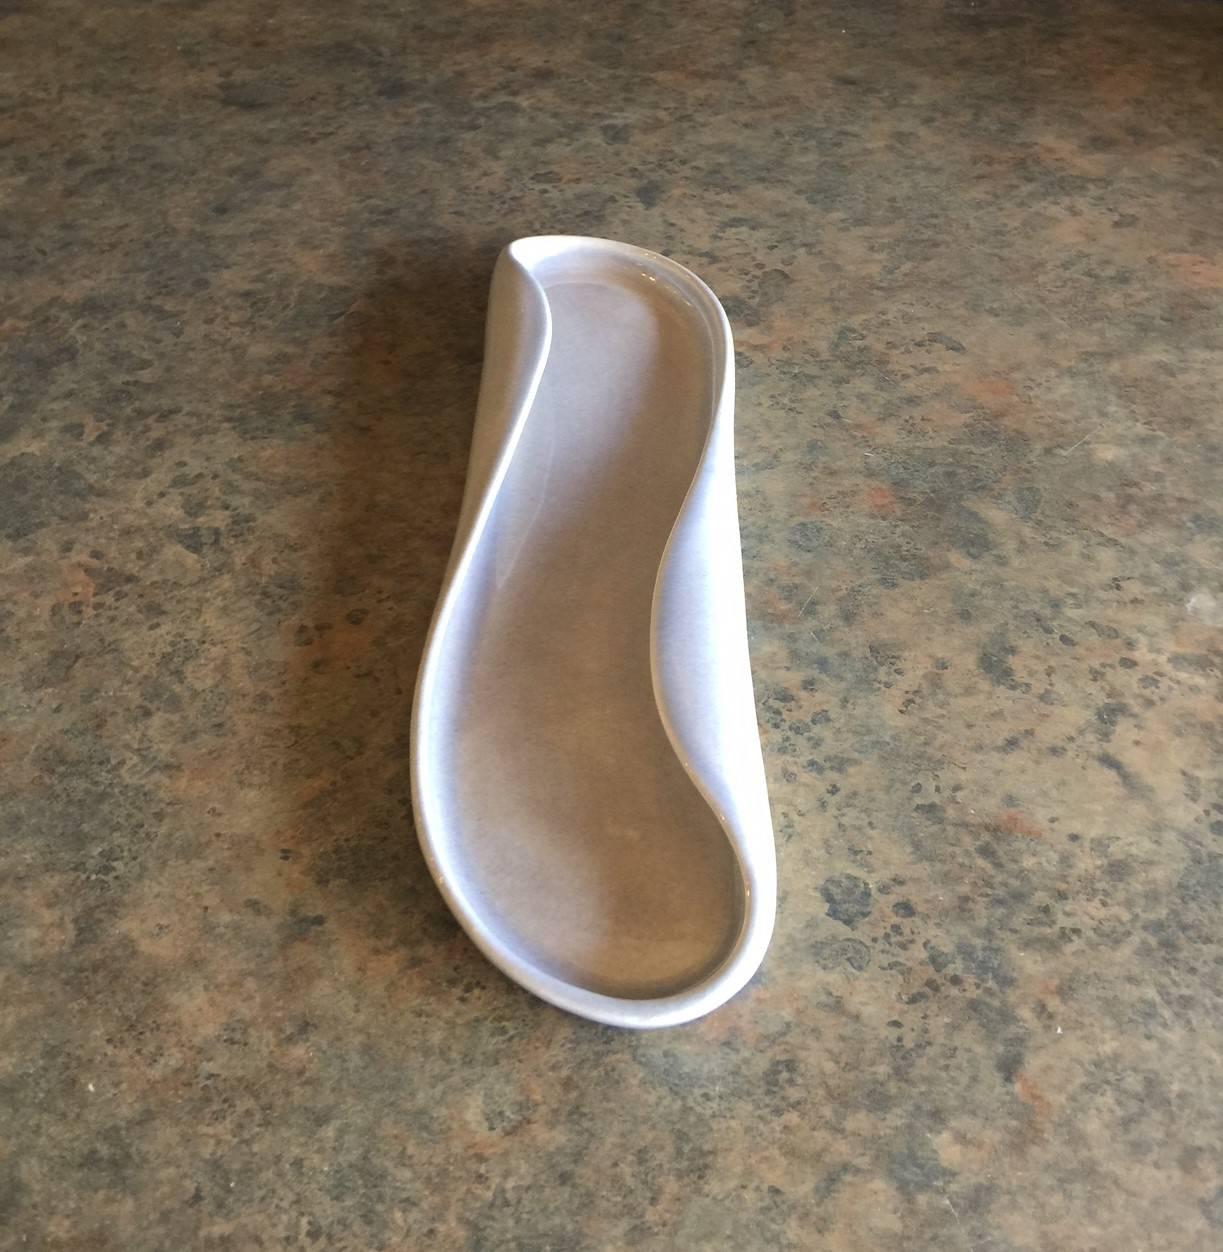 Mid-20th Century American Modern Ceramic Celery Tray by Russel Wright for Steubenville Pottery